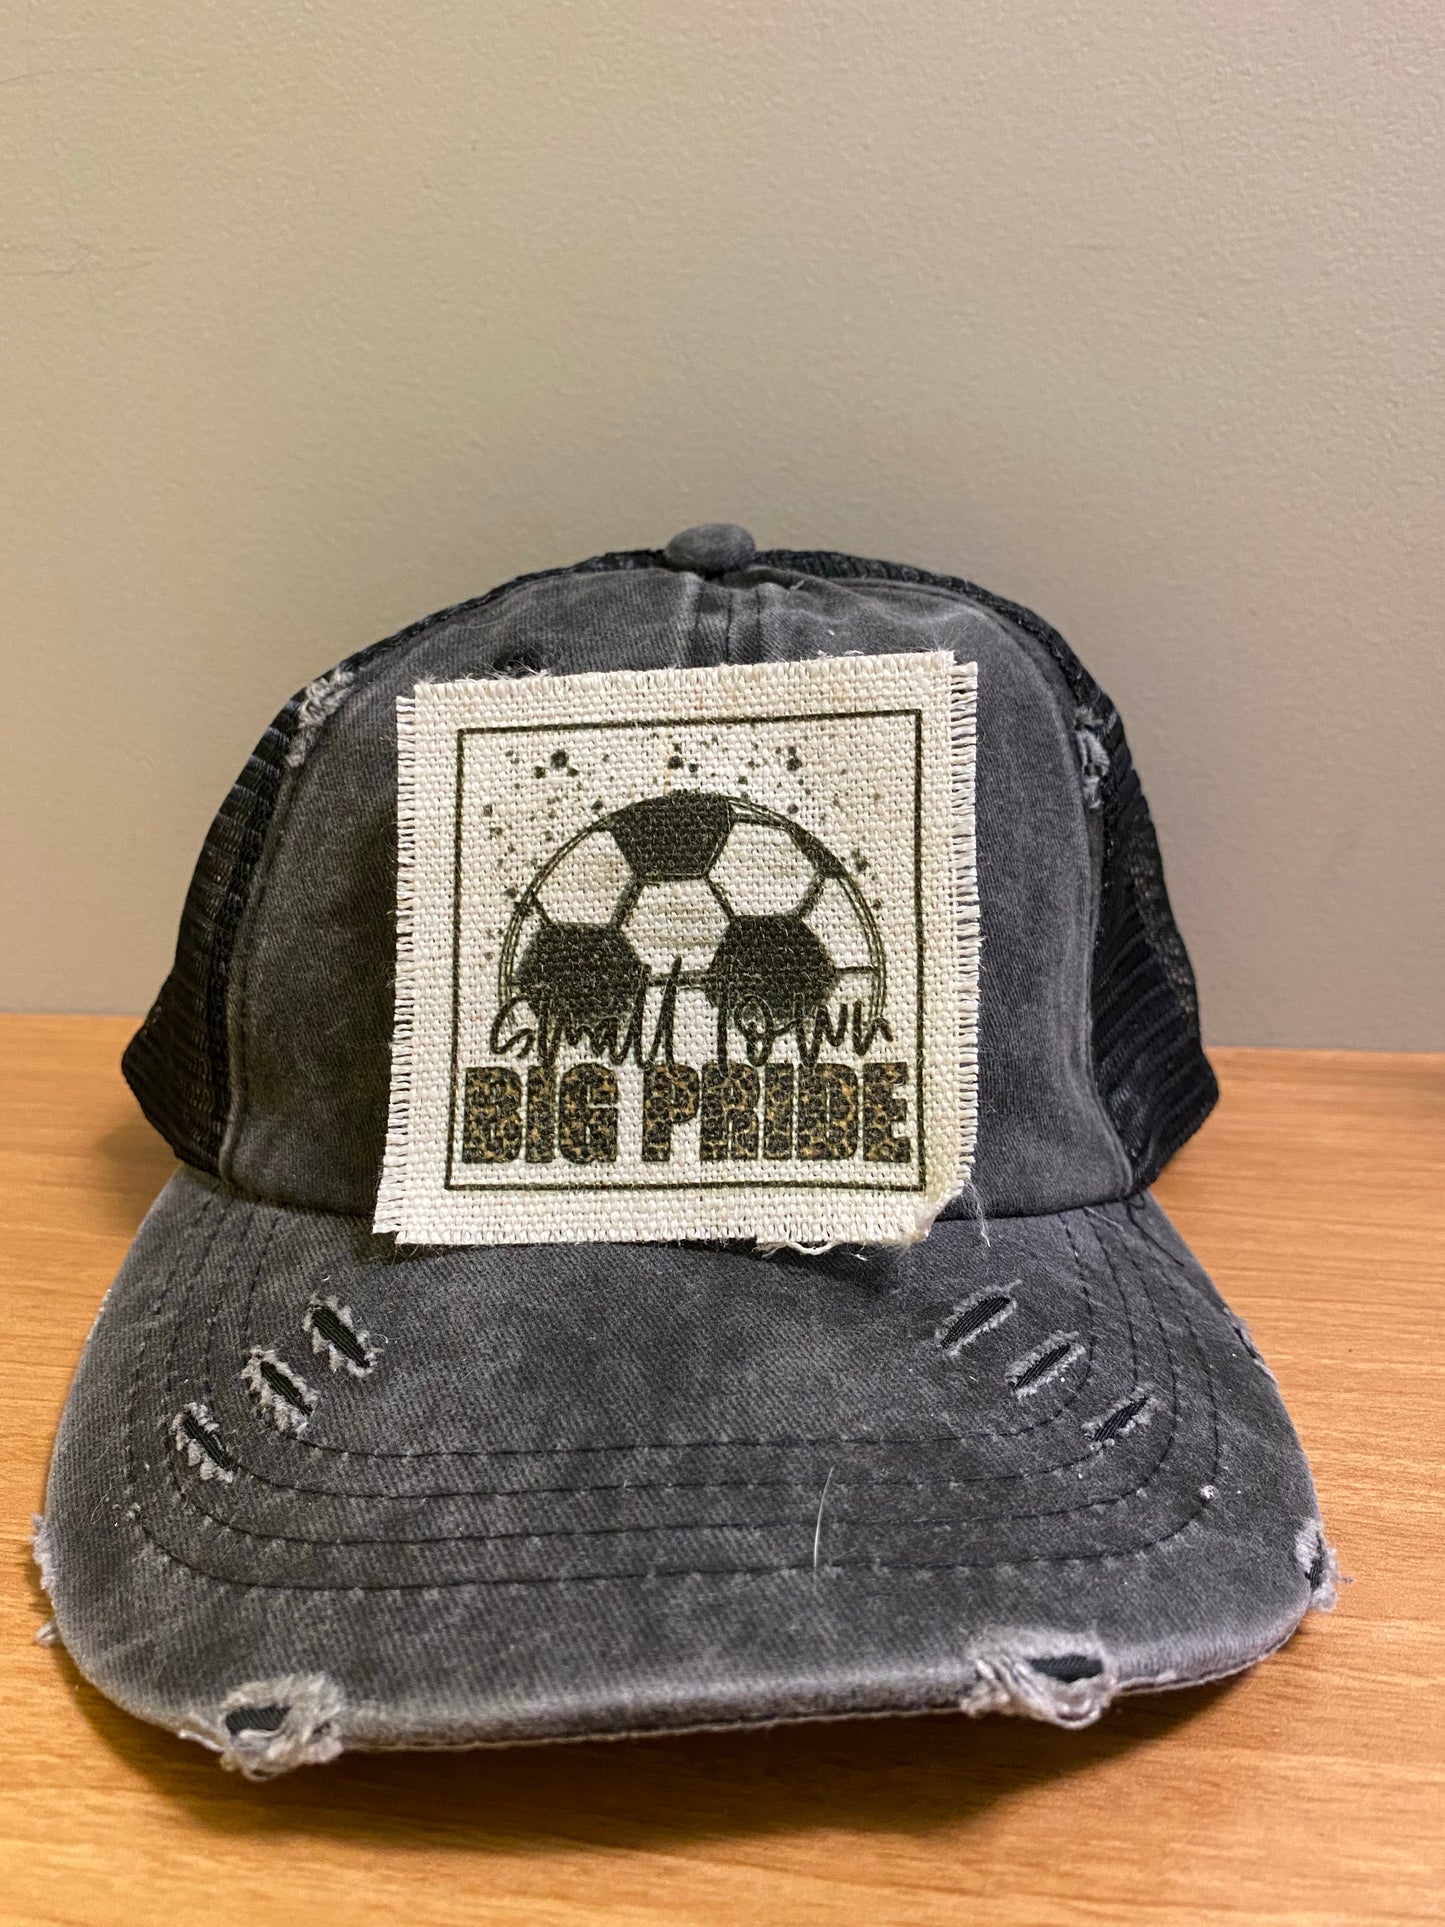 Small Town Big Pride Soccer Hat Patch